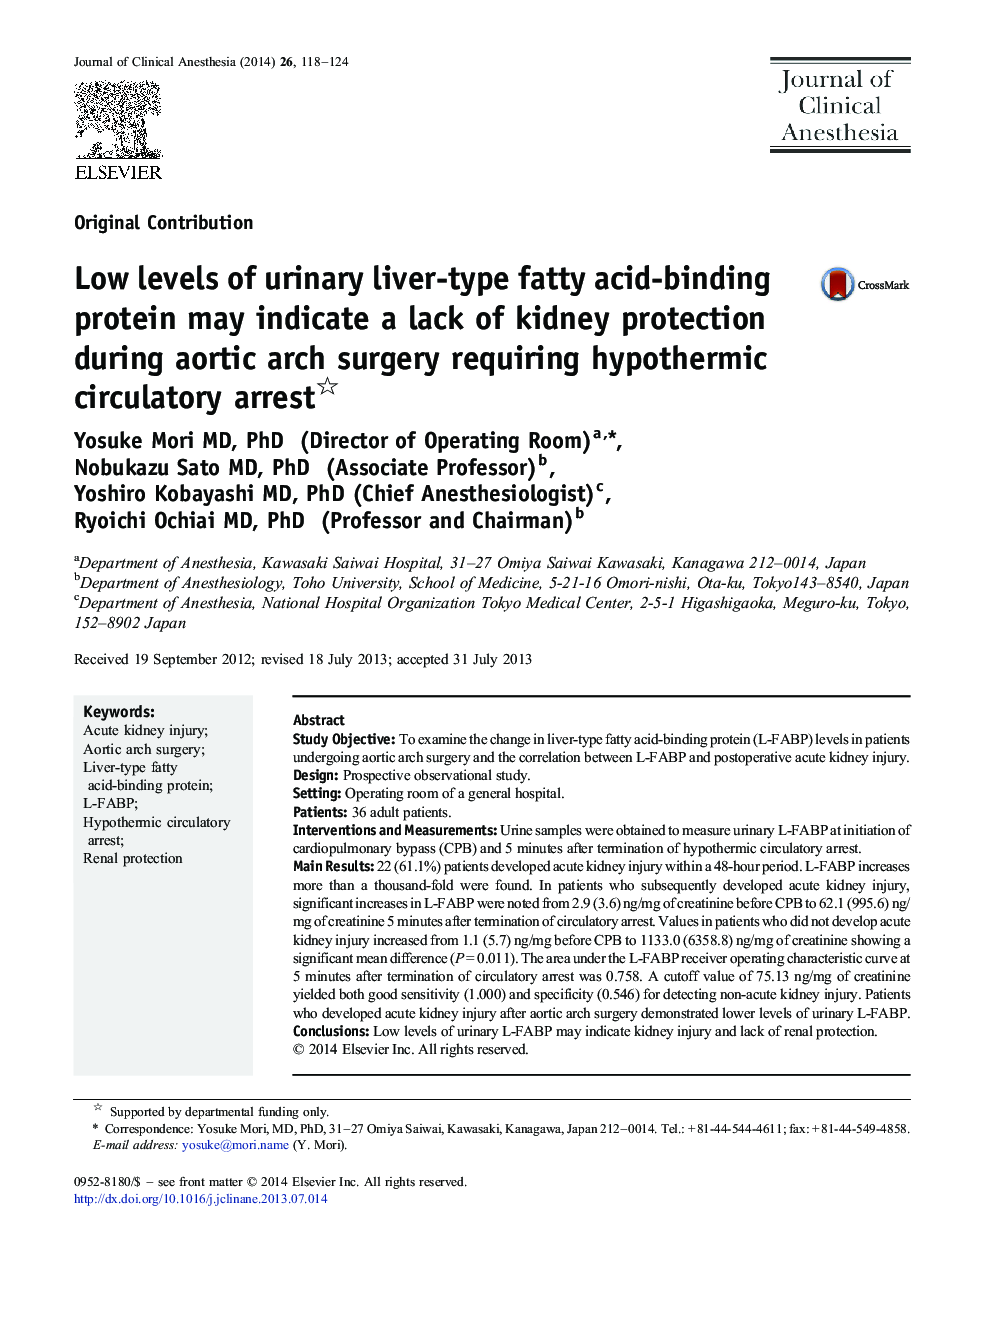 Low levels of urinary liver-type fatty acid-binding protein may indicate a lack of kidney protection during aortic arch surgery requiring hypothermic circulatory arrest 